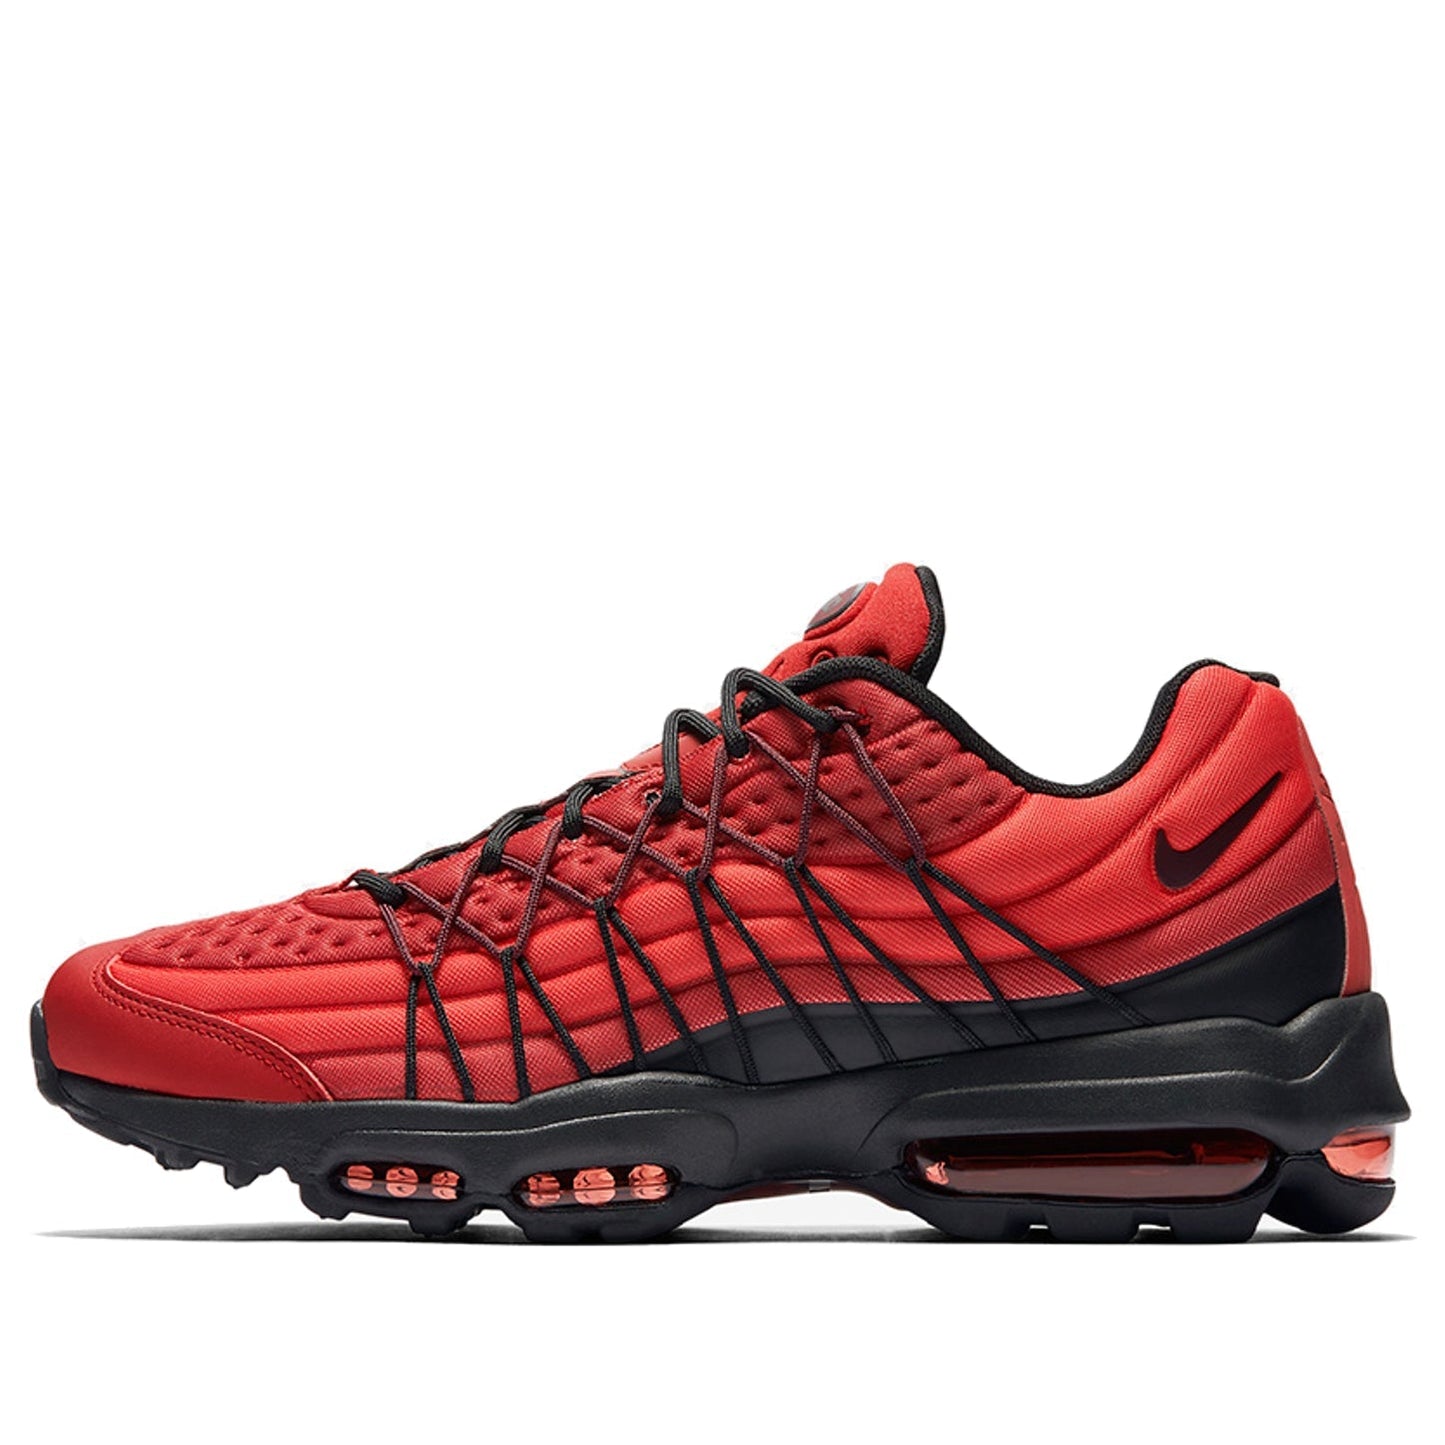 Nike Air Max 95 Ultra SE Gym Red 845033-600 sneakmarks